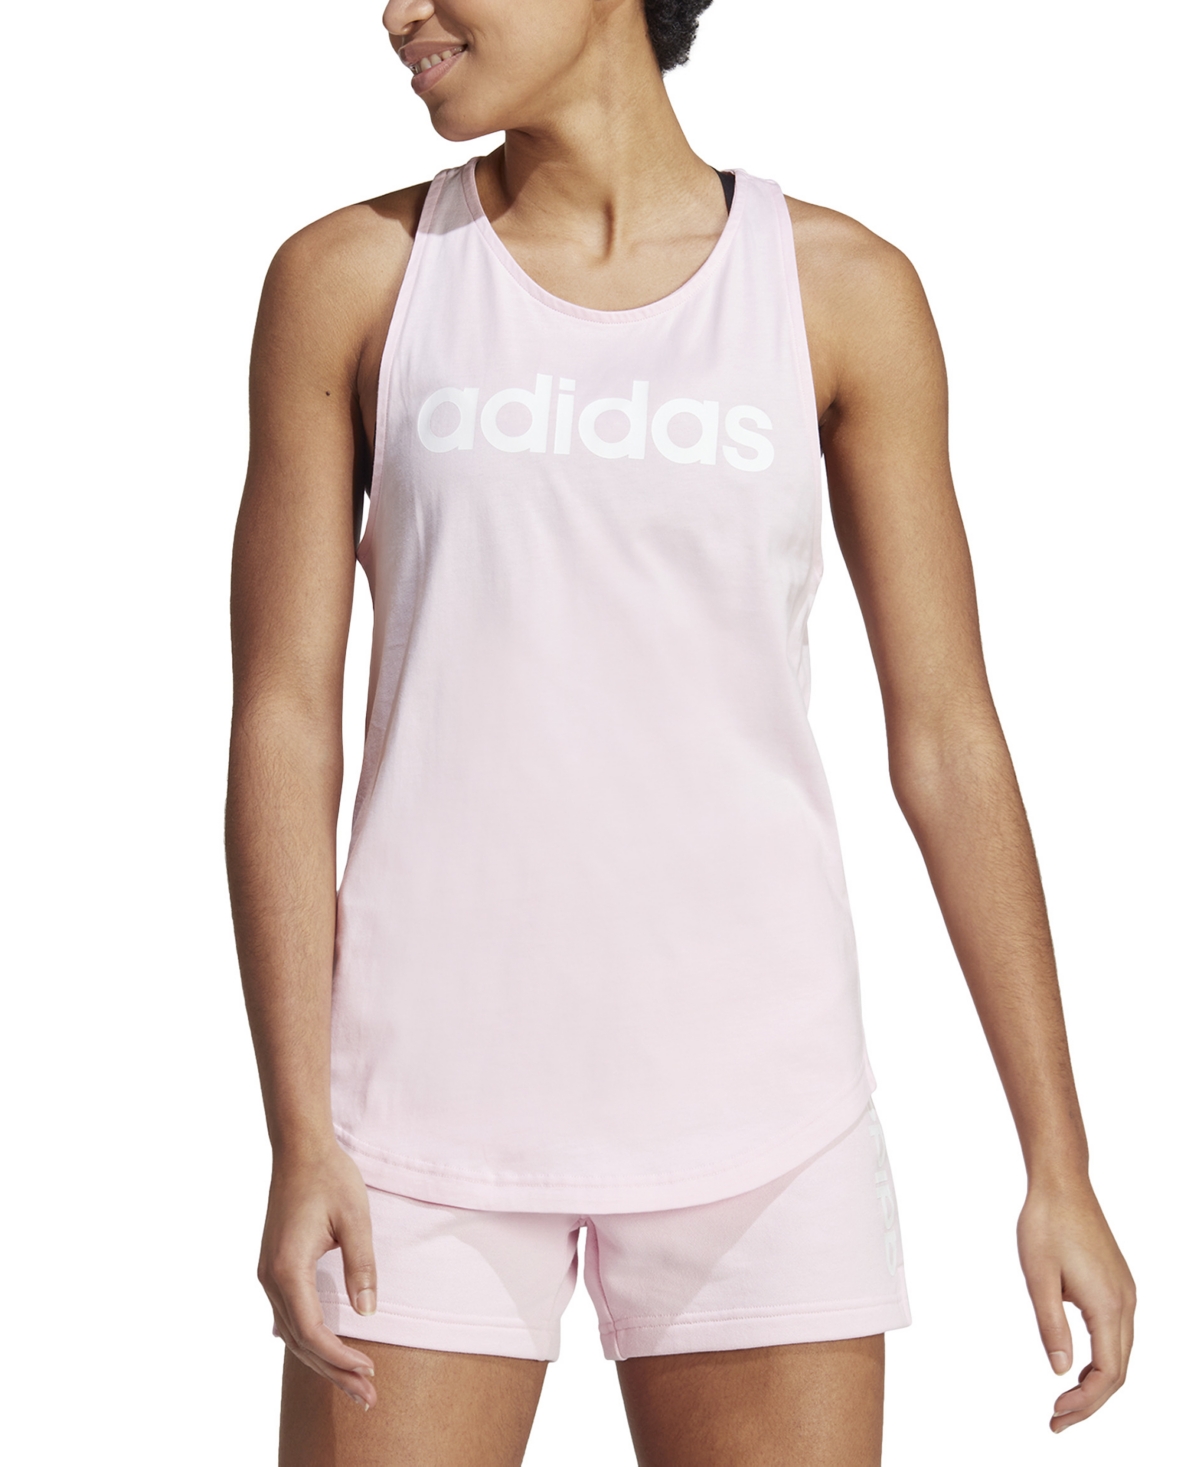 Women's Cotton Essentials Loose Logo Tank Top - Clear Pink/white